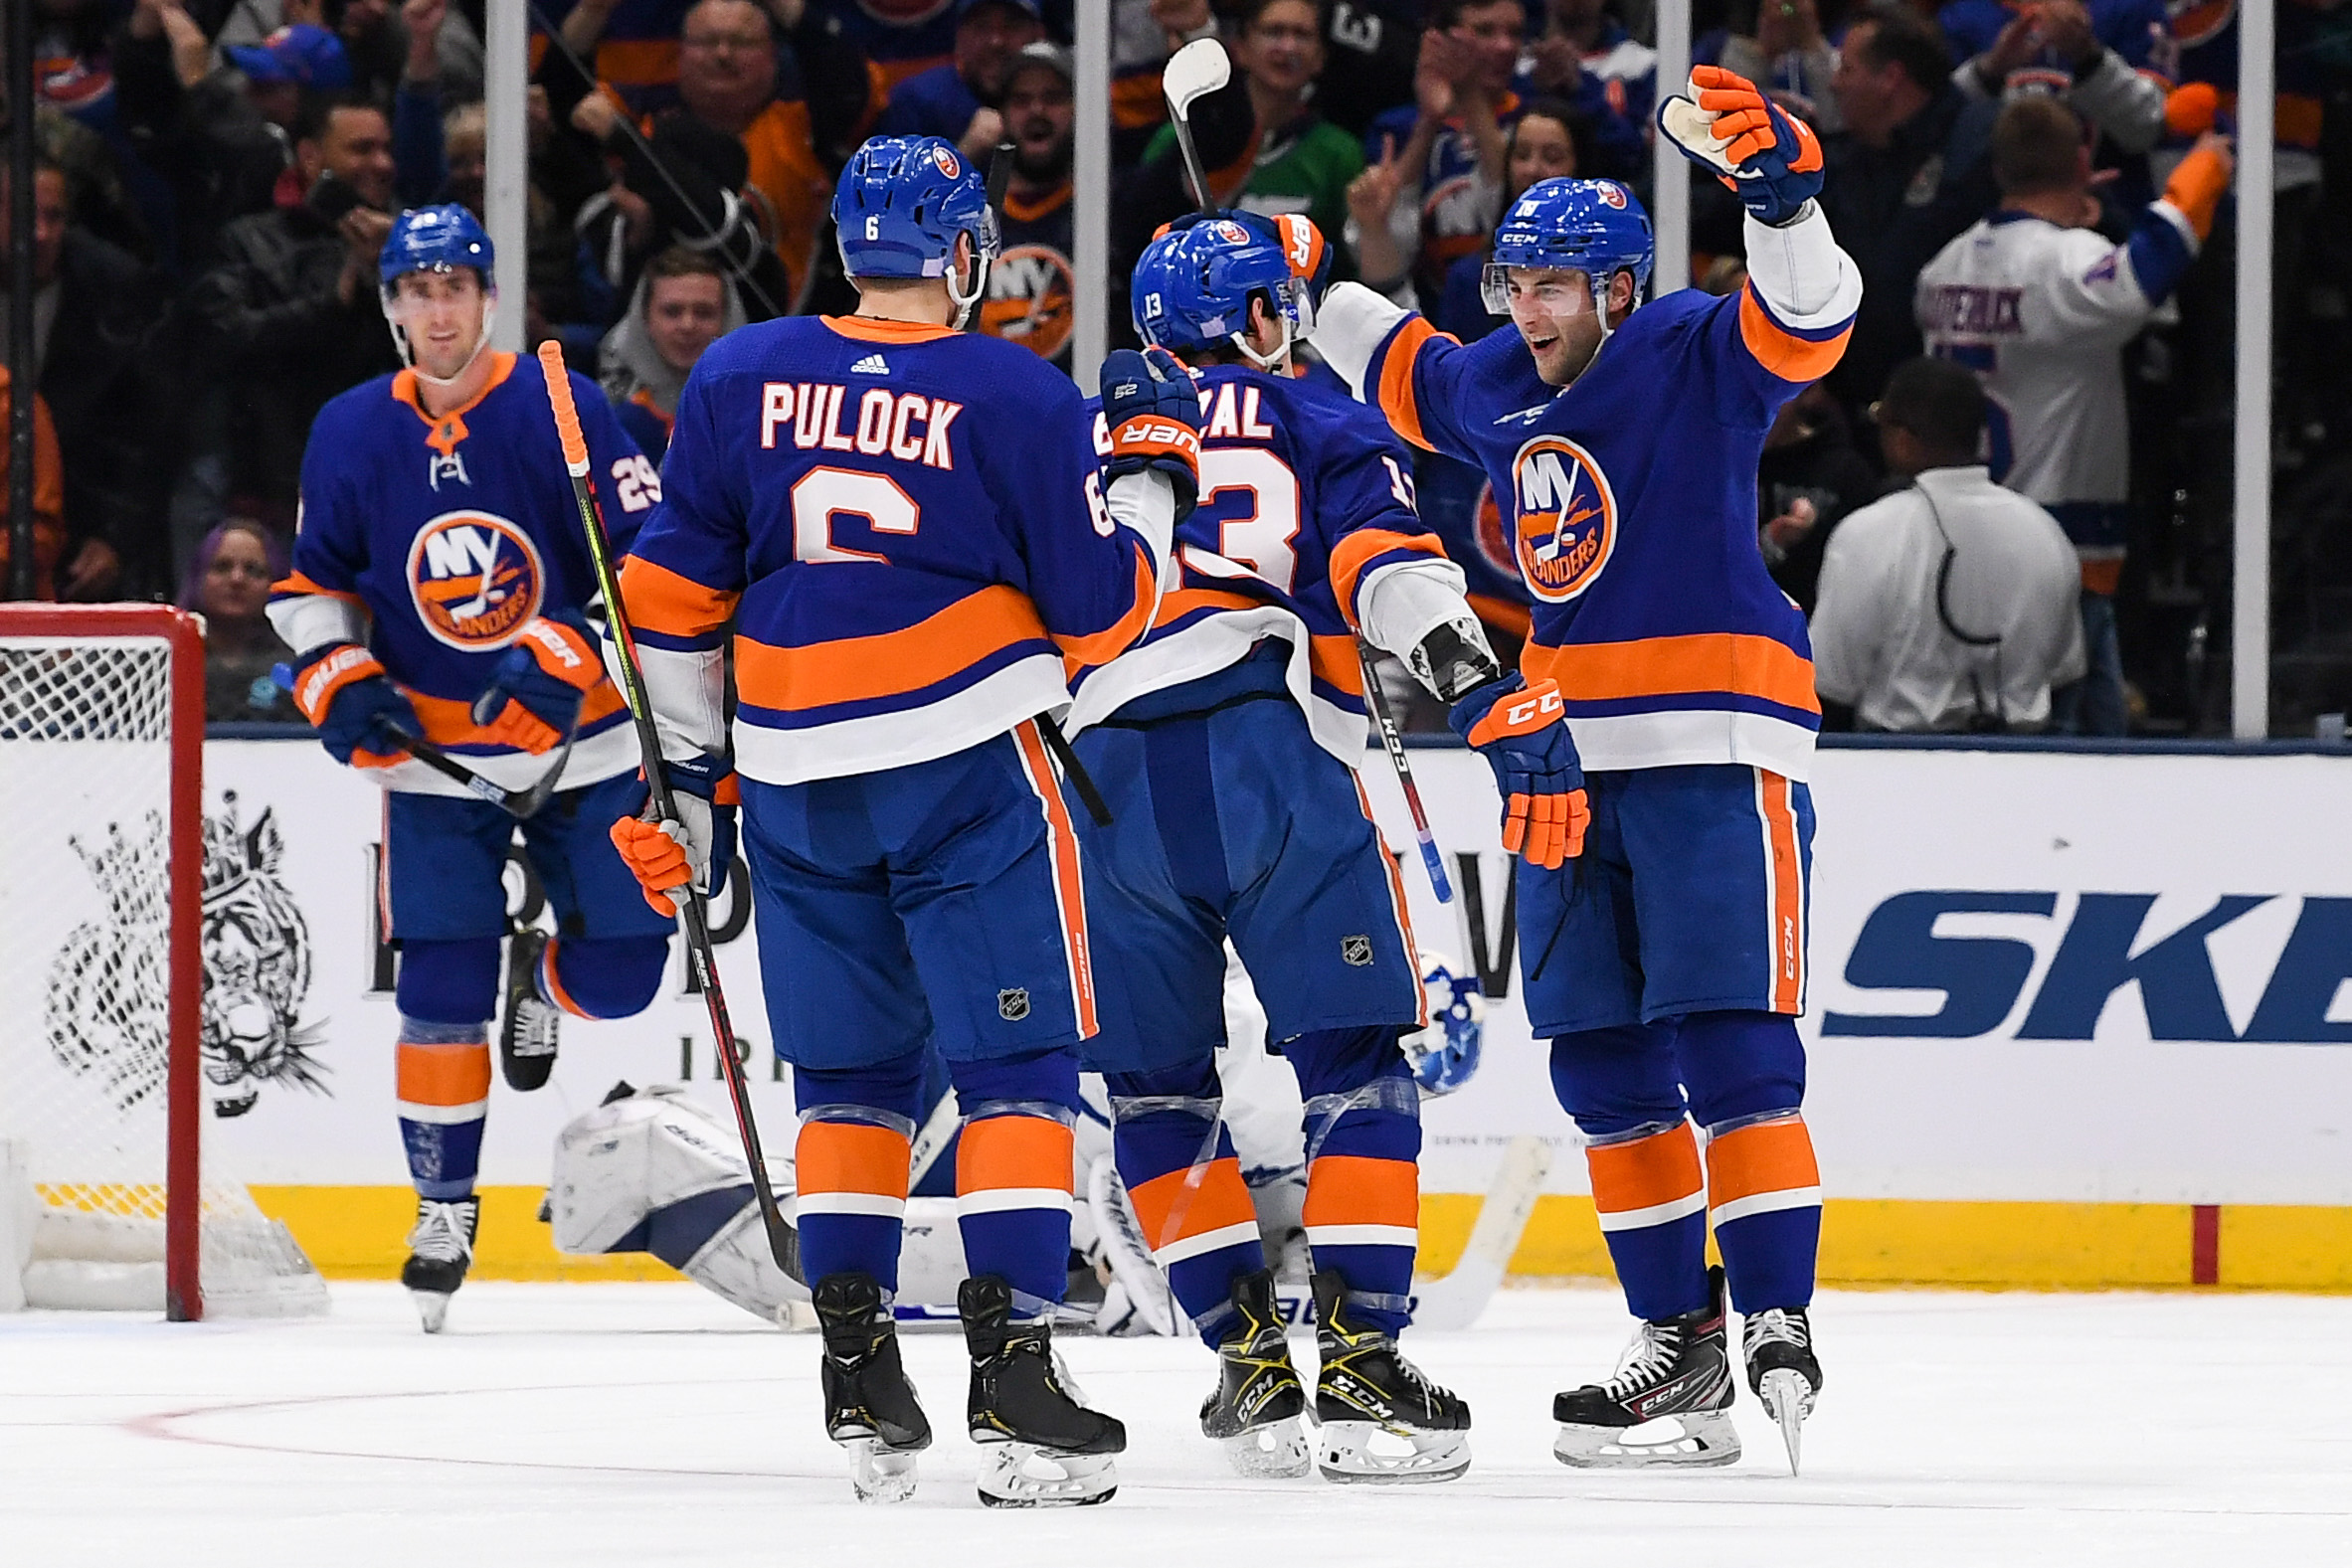 Nov 13, 2019; Uniondale, NY, USA; New York Islanders center Derick Brassard (10) celebrates with center Mathew Barzal (13) and defenseman Ryan Pulock (6) after scoring a goal against the Toronto Maple Leafs during the third period at Nassau Veterans Memorial Coliseum. Mandatory Credit: Dennis Schneidler-USA TODAY Sports